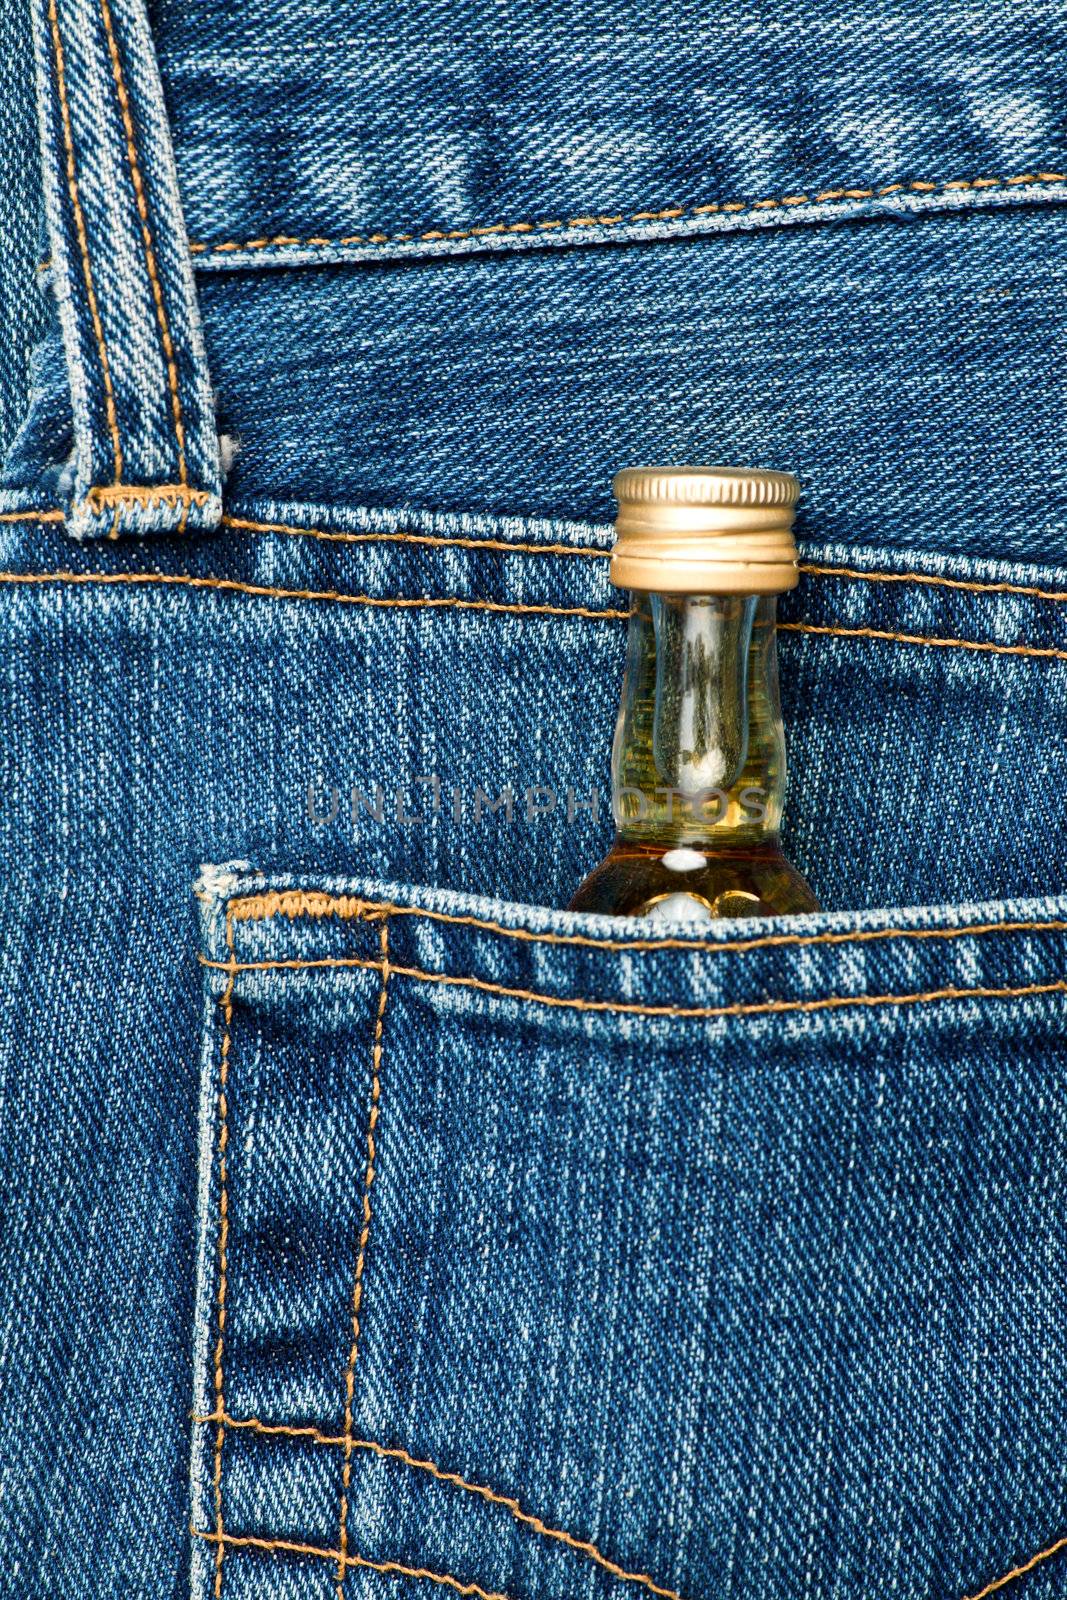 Blue jeans pocket with small bottle of alcohol